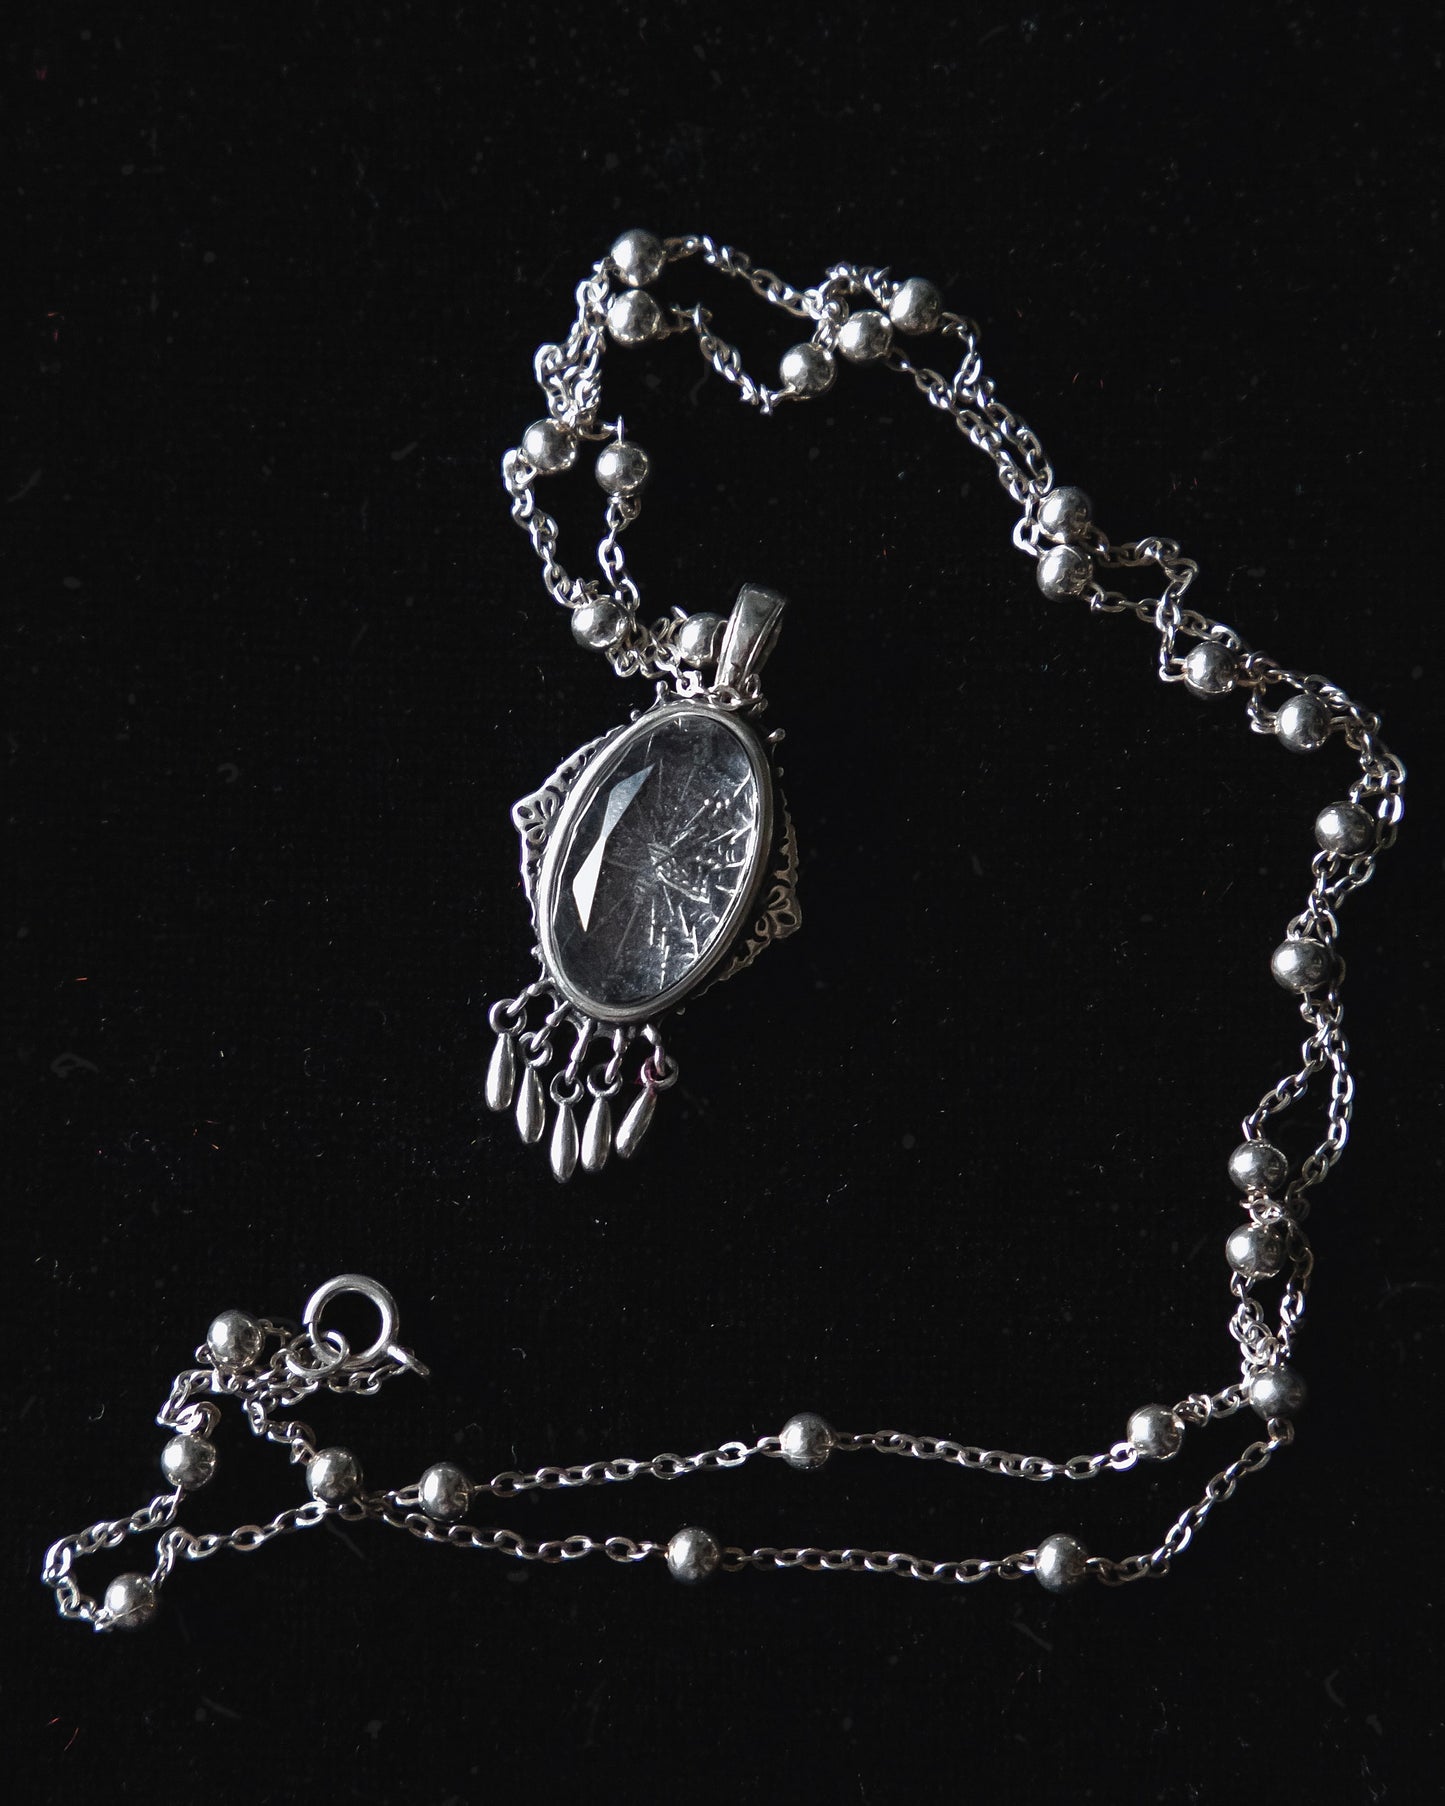 The "Ghost Moth Bride" Glass Casket Necklace